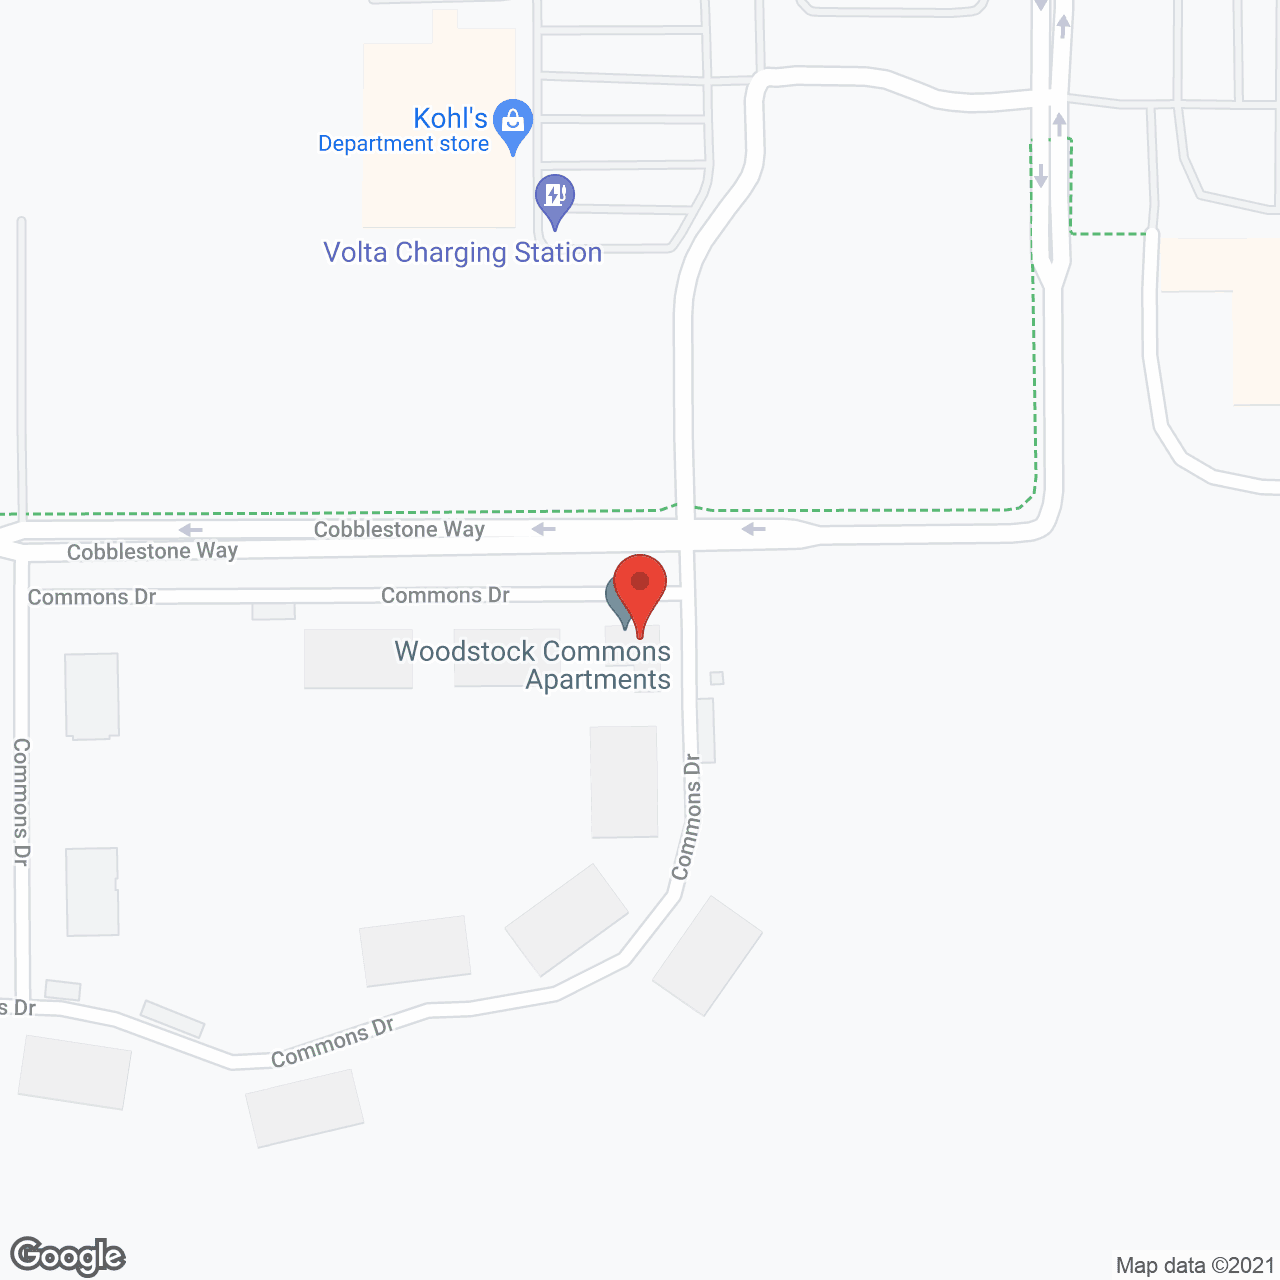 Woodstock Commons Apartments in google map